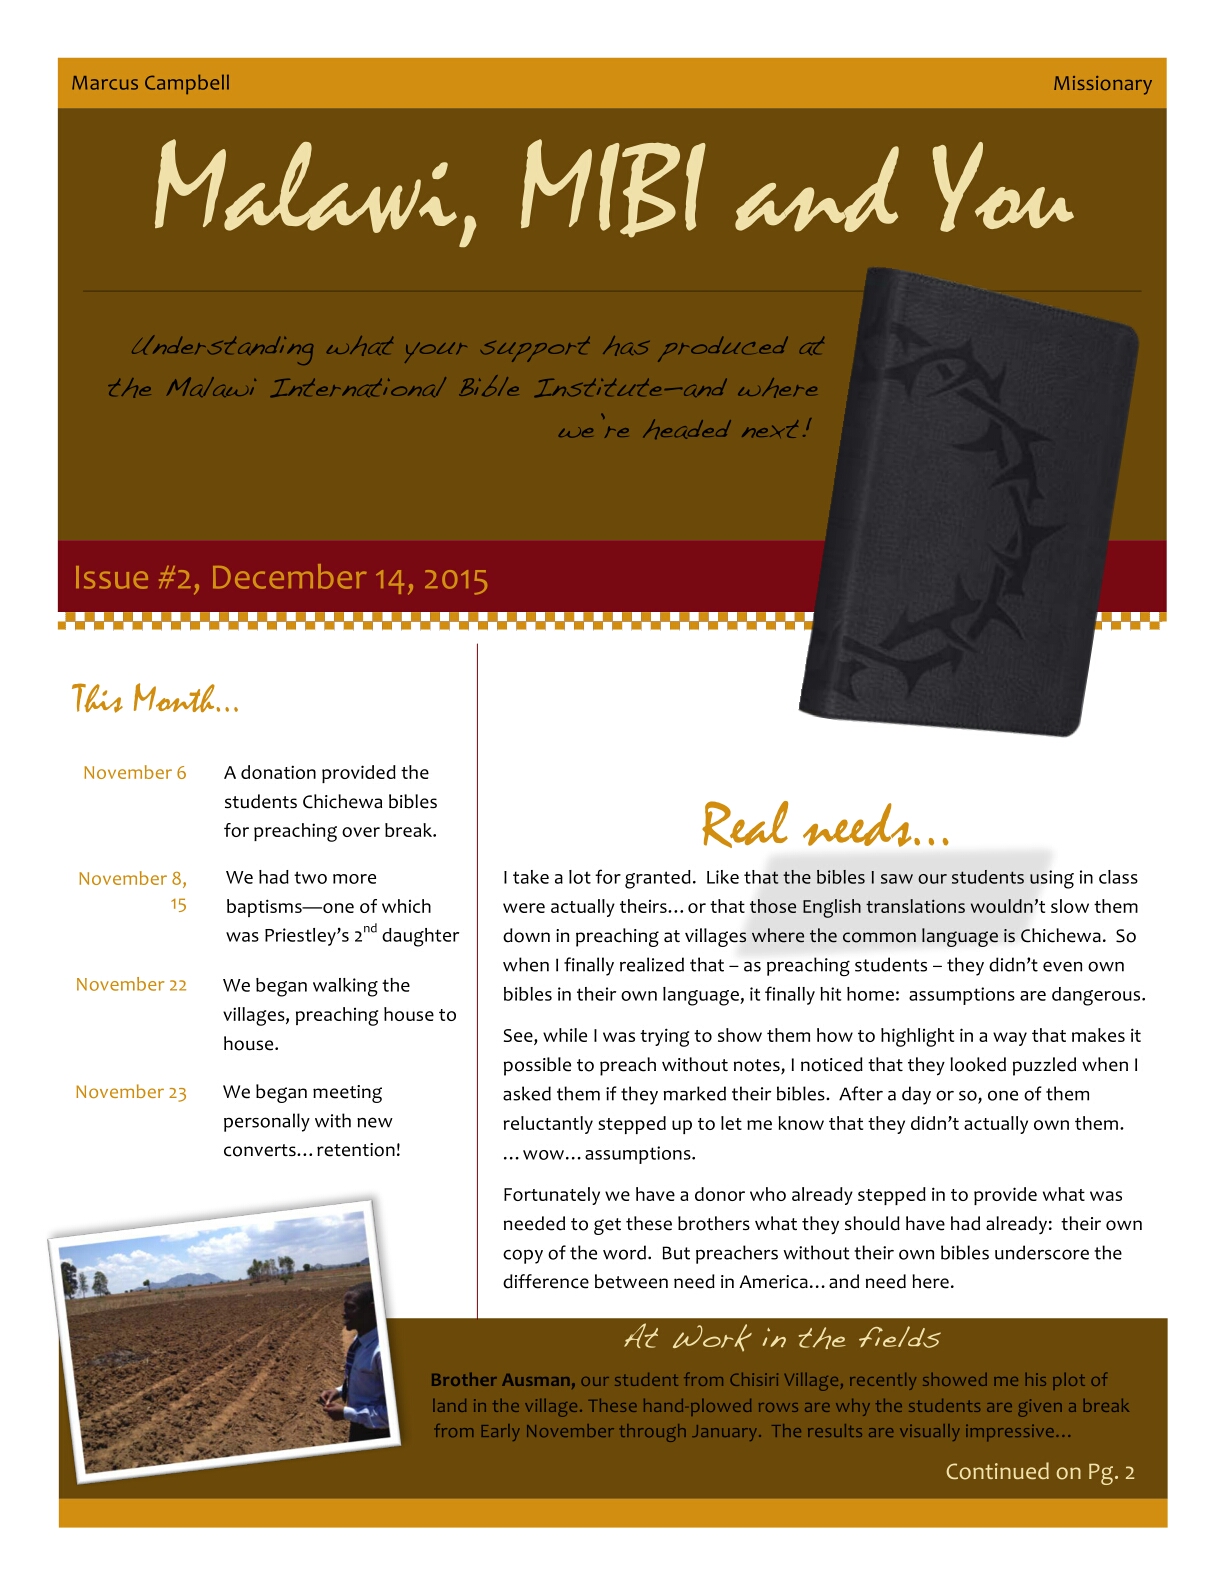 mission-malawi-newsletter-issue-2-date-12-14-15-smaller-file [1]